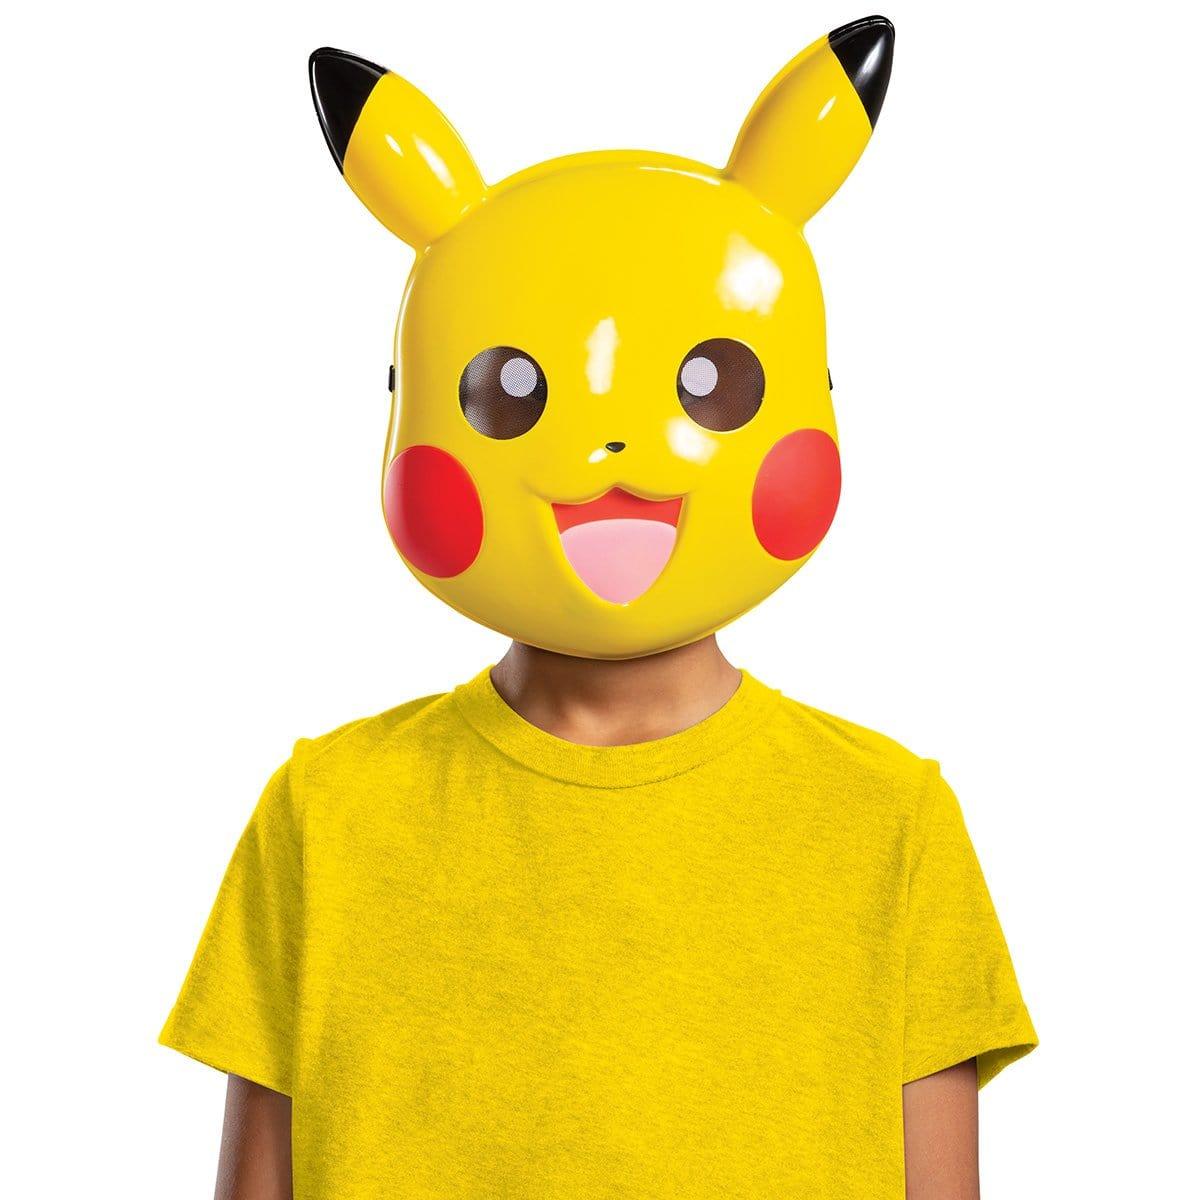 Buy Costume Accessories Pikachu plastic mask, Pokémon sold at Party Expert